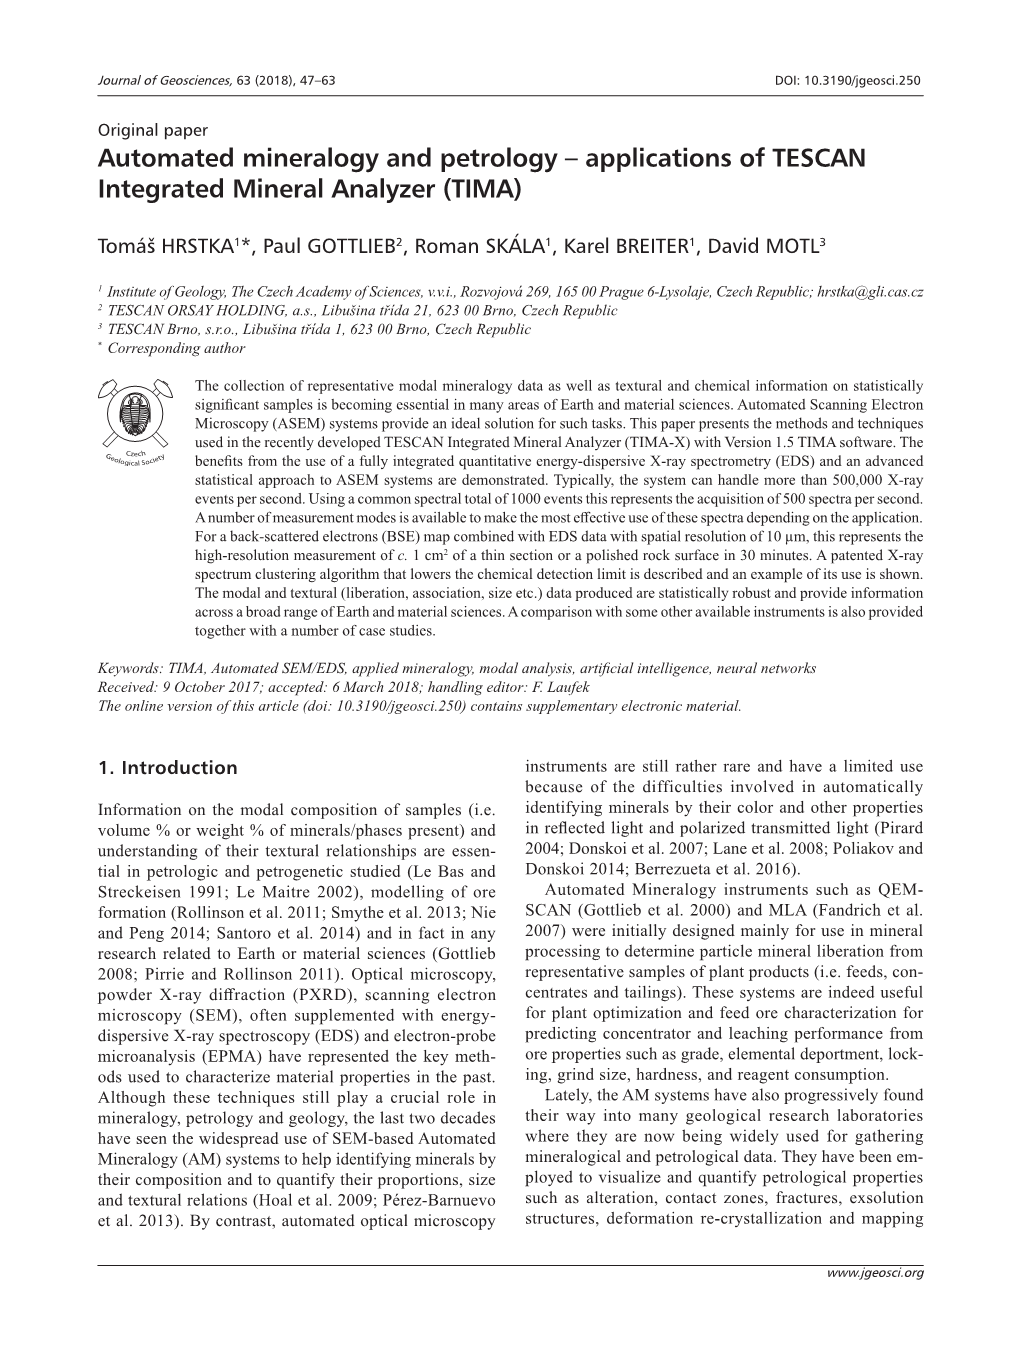 Automated Mineralogy and Petrology – Applications of TESCAN Integrated Mineral Analyzer (TIMA)